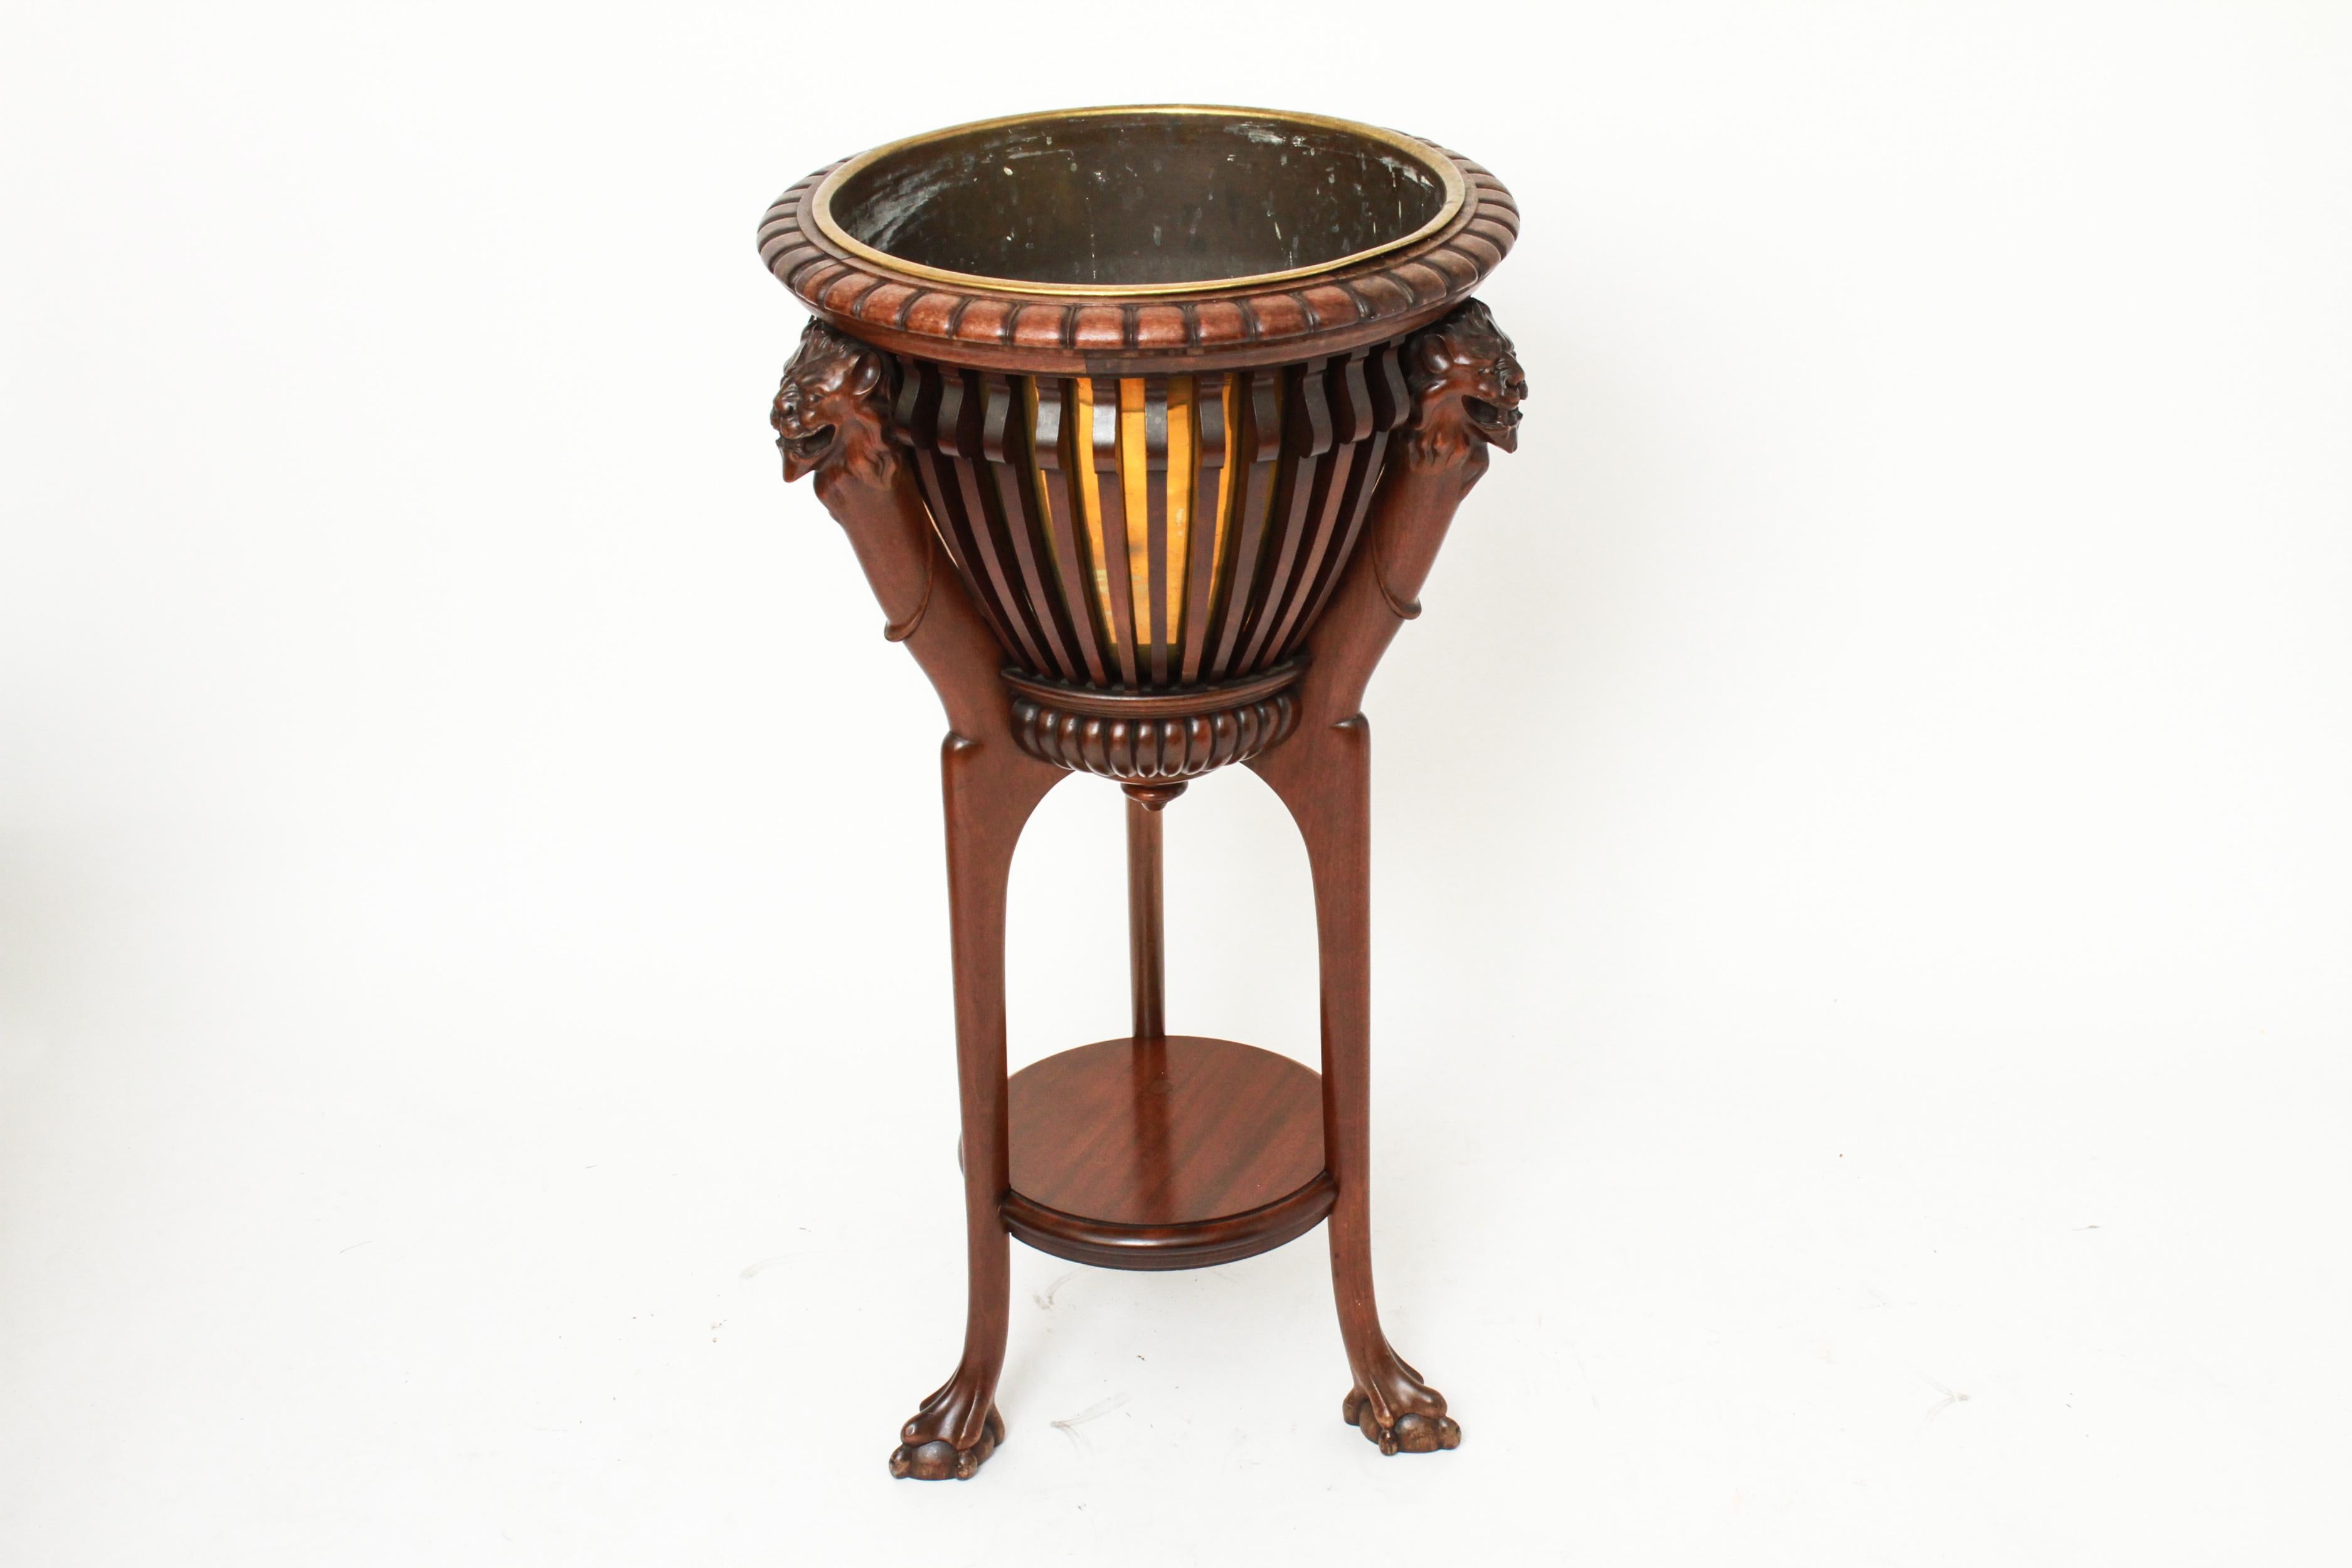 19th Century Neoclassical Style Hardwood Jardinière with Lion Motif